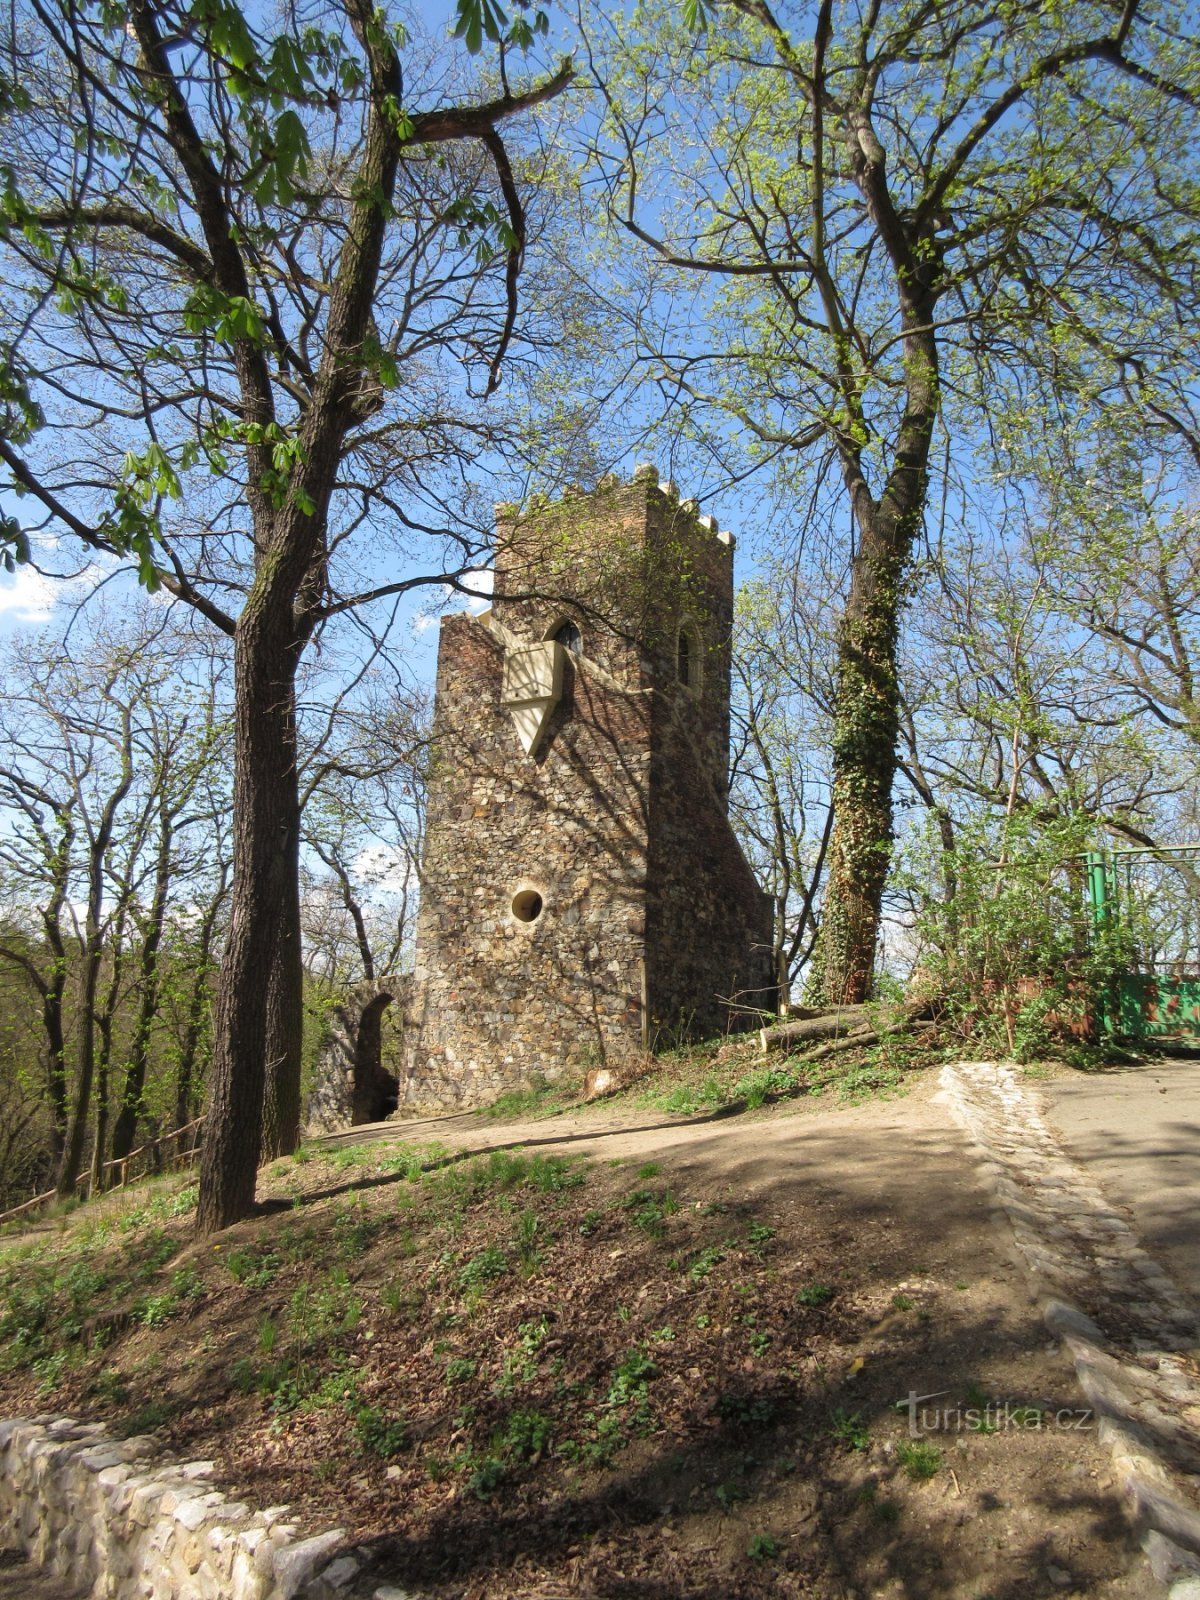 A man-made ruin with a lookout tower